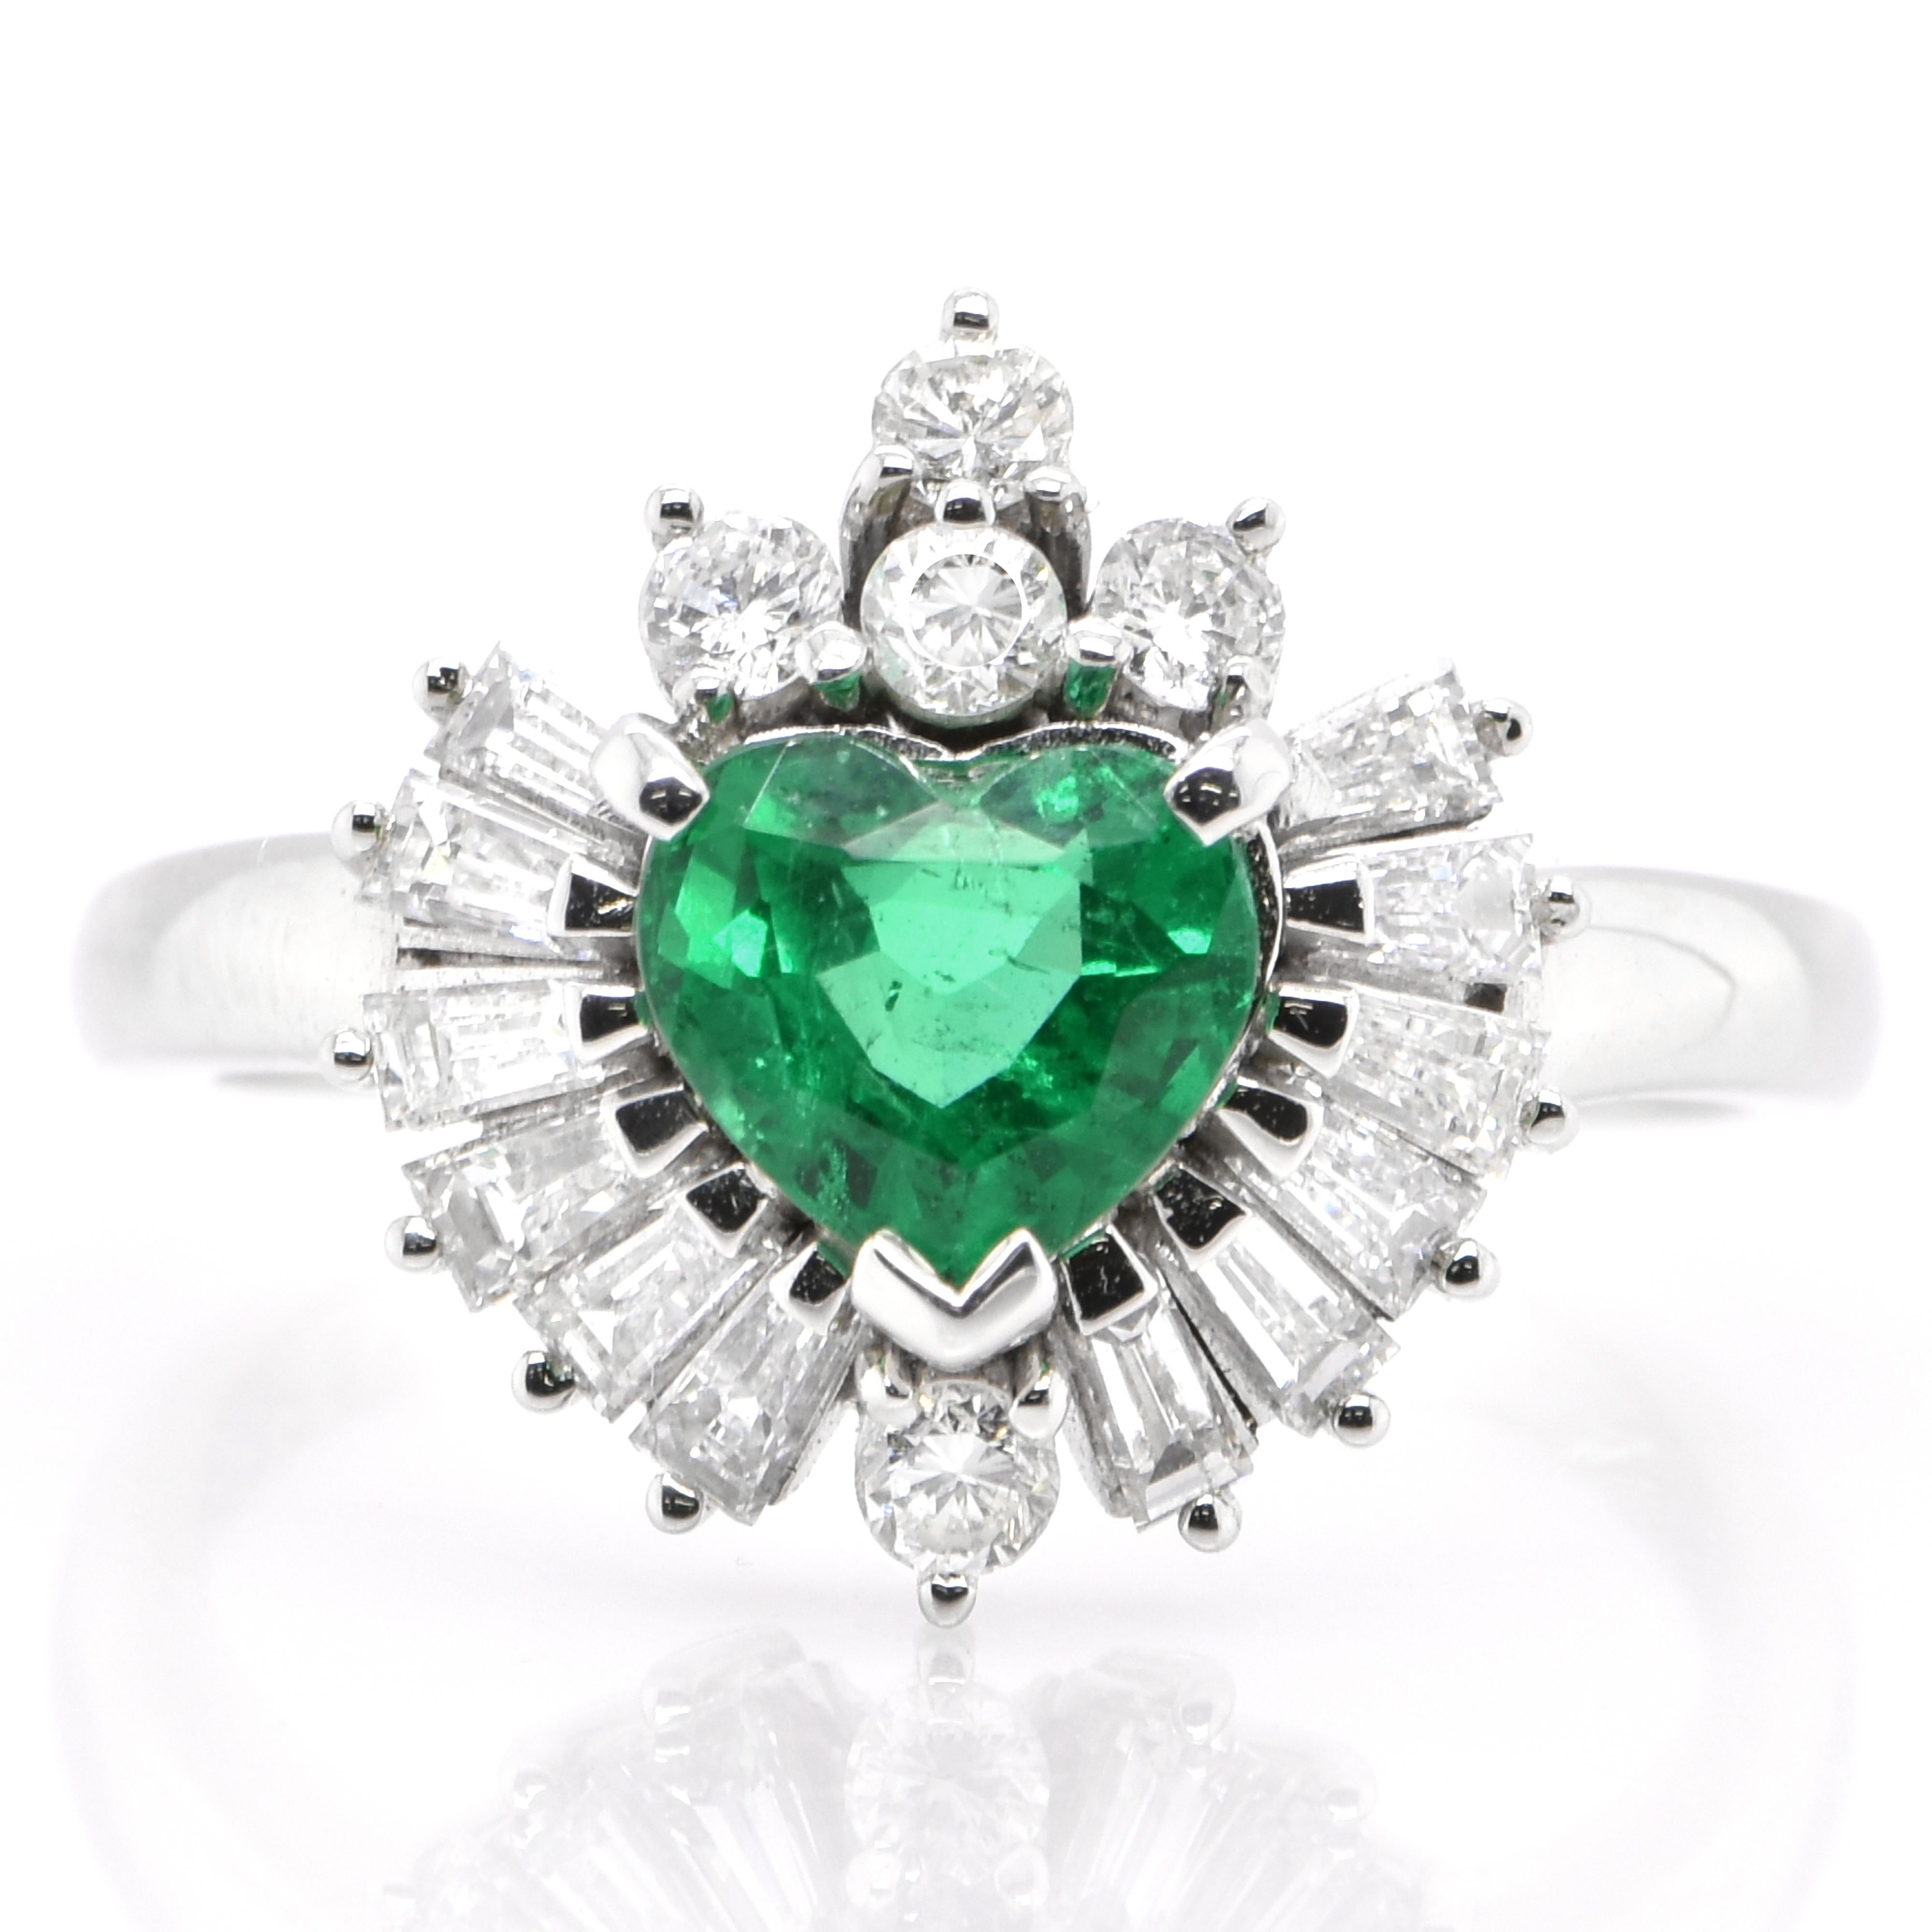 A stunning ring featuring a 1.037 Carat Natural Emerald and 0.88 Carats of Diamond Accents set in Platinum. People have admired emerald’s green for thousands of years. Emeralds have always been associated with the lushest landscapes and the richest